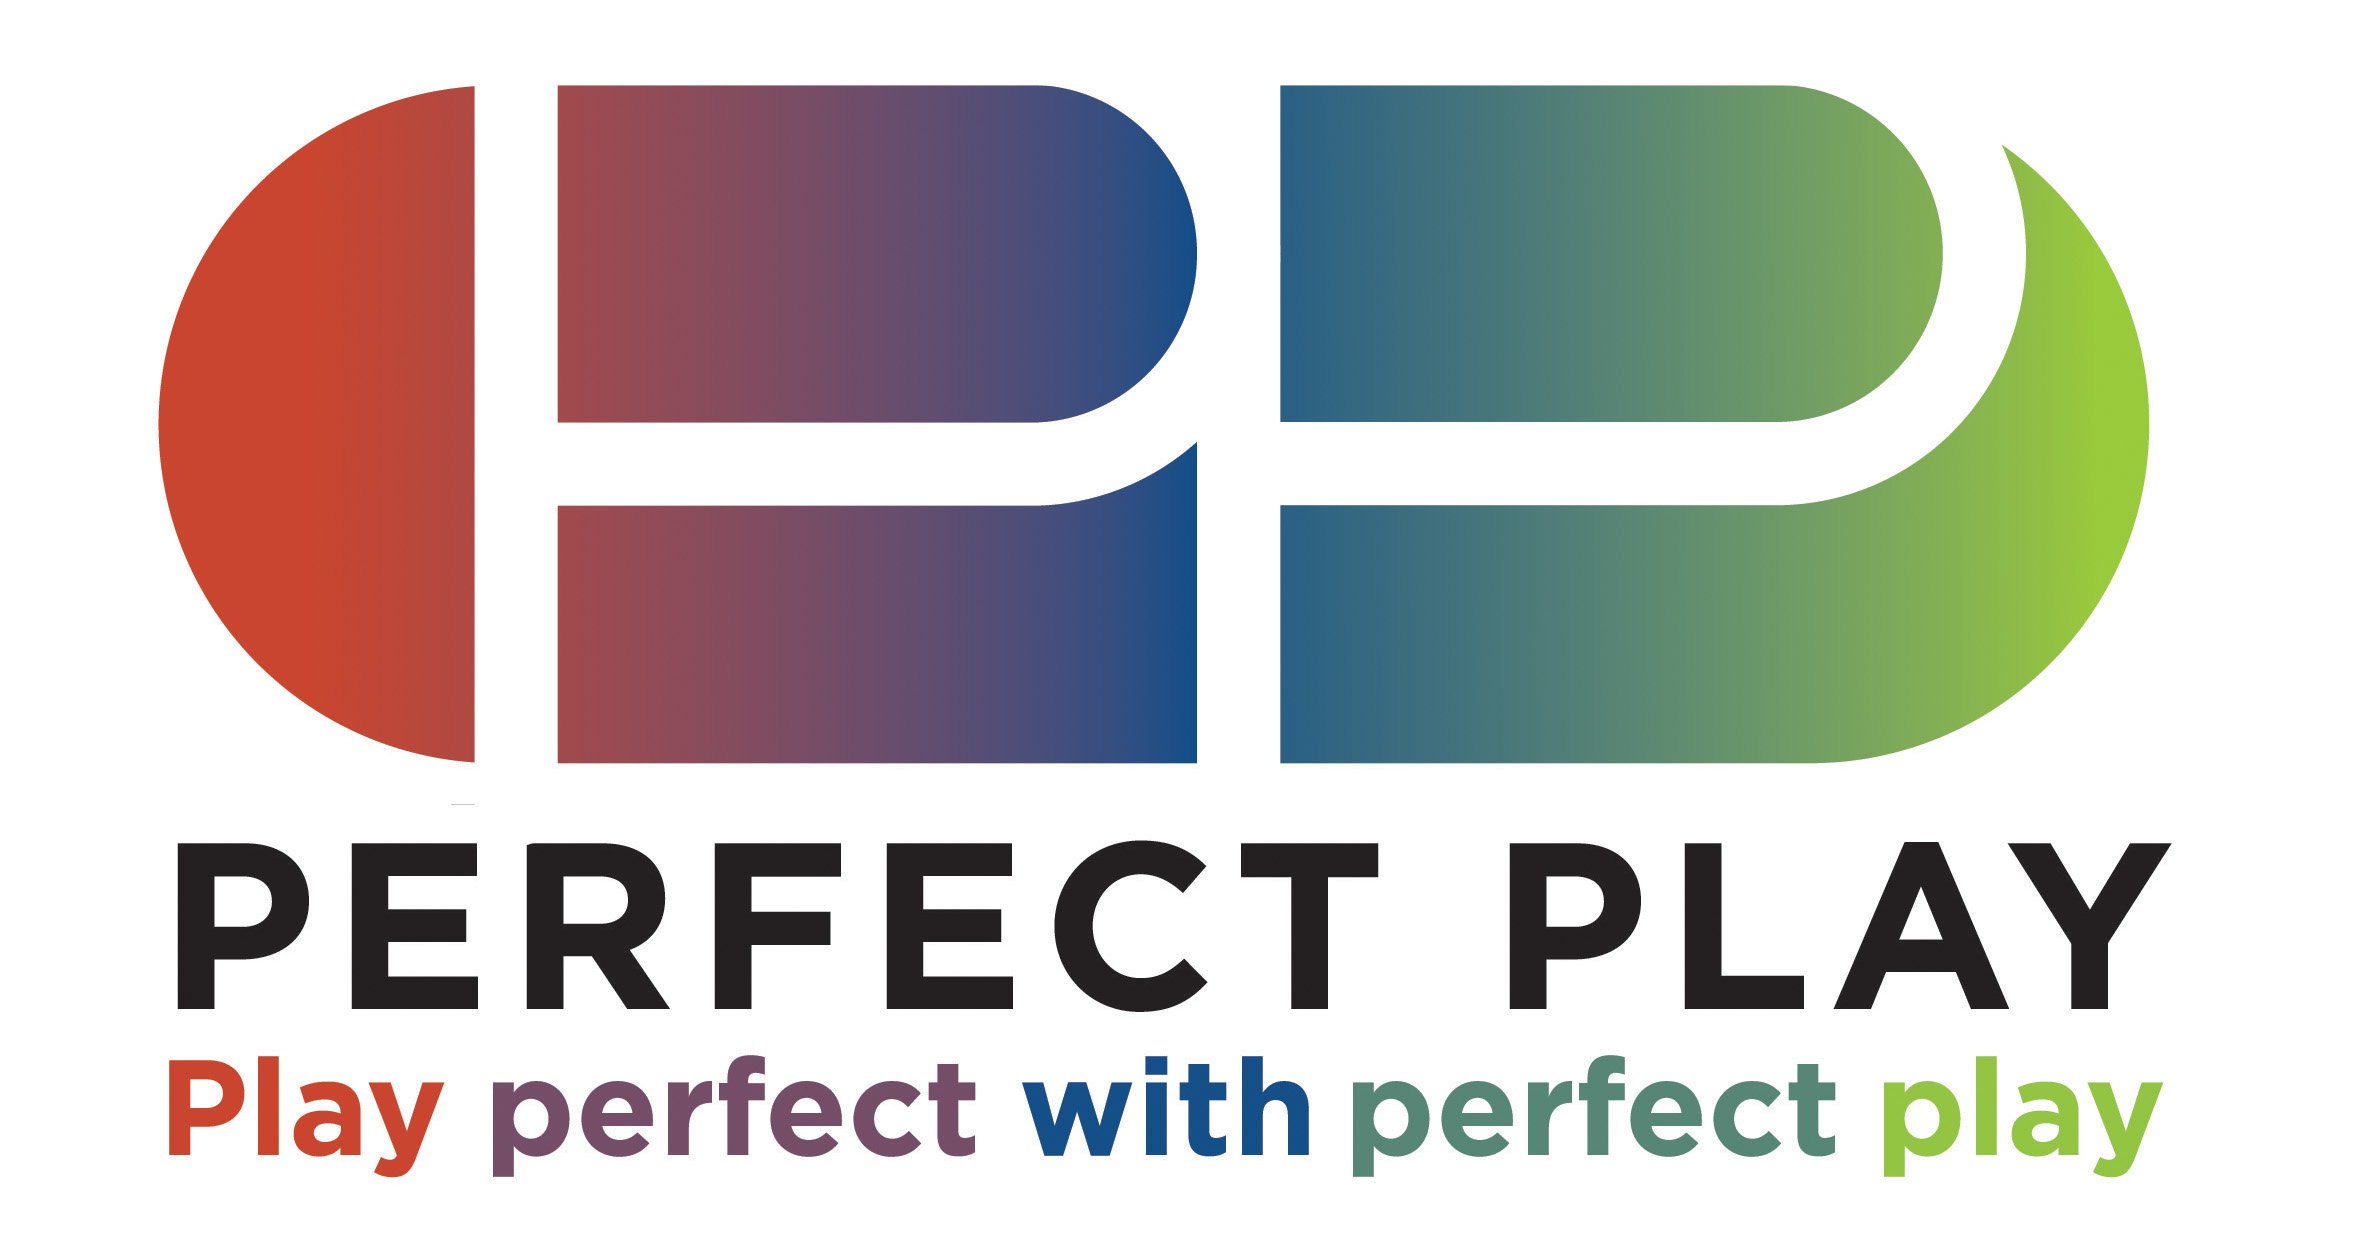 About Perfect Play – PerfectPlay